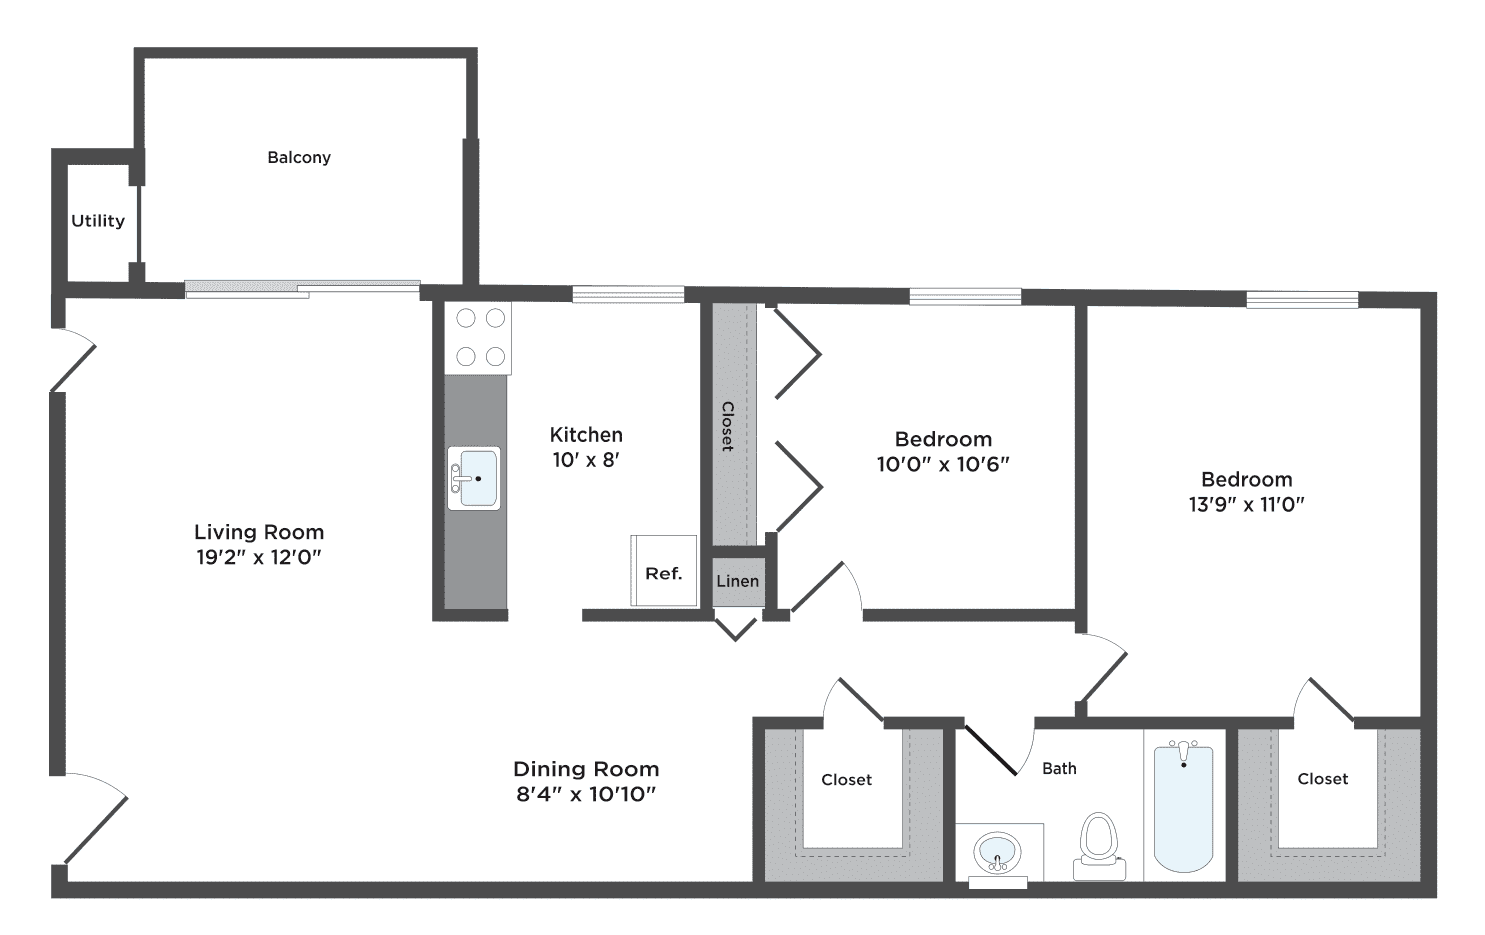 Two Bedroom Floorplan. Open living/dining room area with a balcony and utility room lead to the kitchen, linen closet, full bathroom and first walk-in closet. There are two bedrooms, one with a large built-in closet and the other with the second walk-in closet.